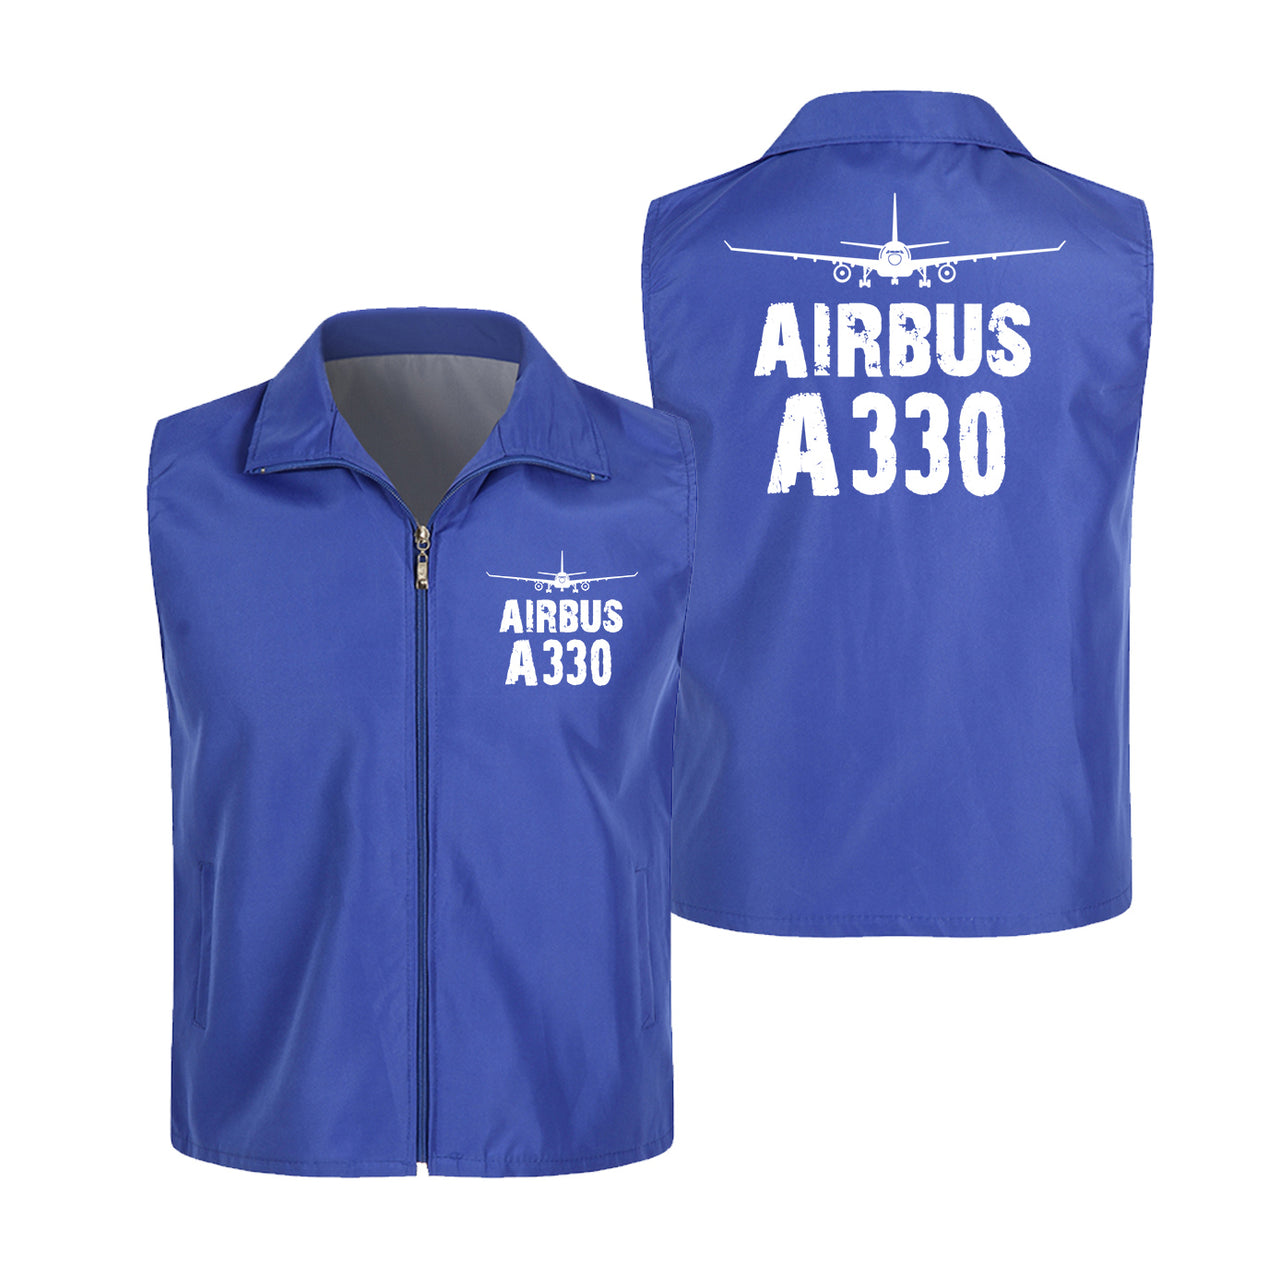 Airbus A330 & Plane Designed Thin Style Vests